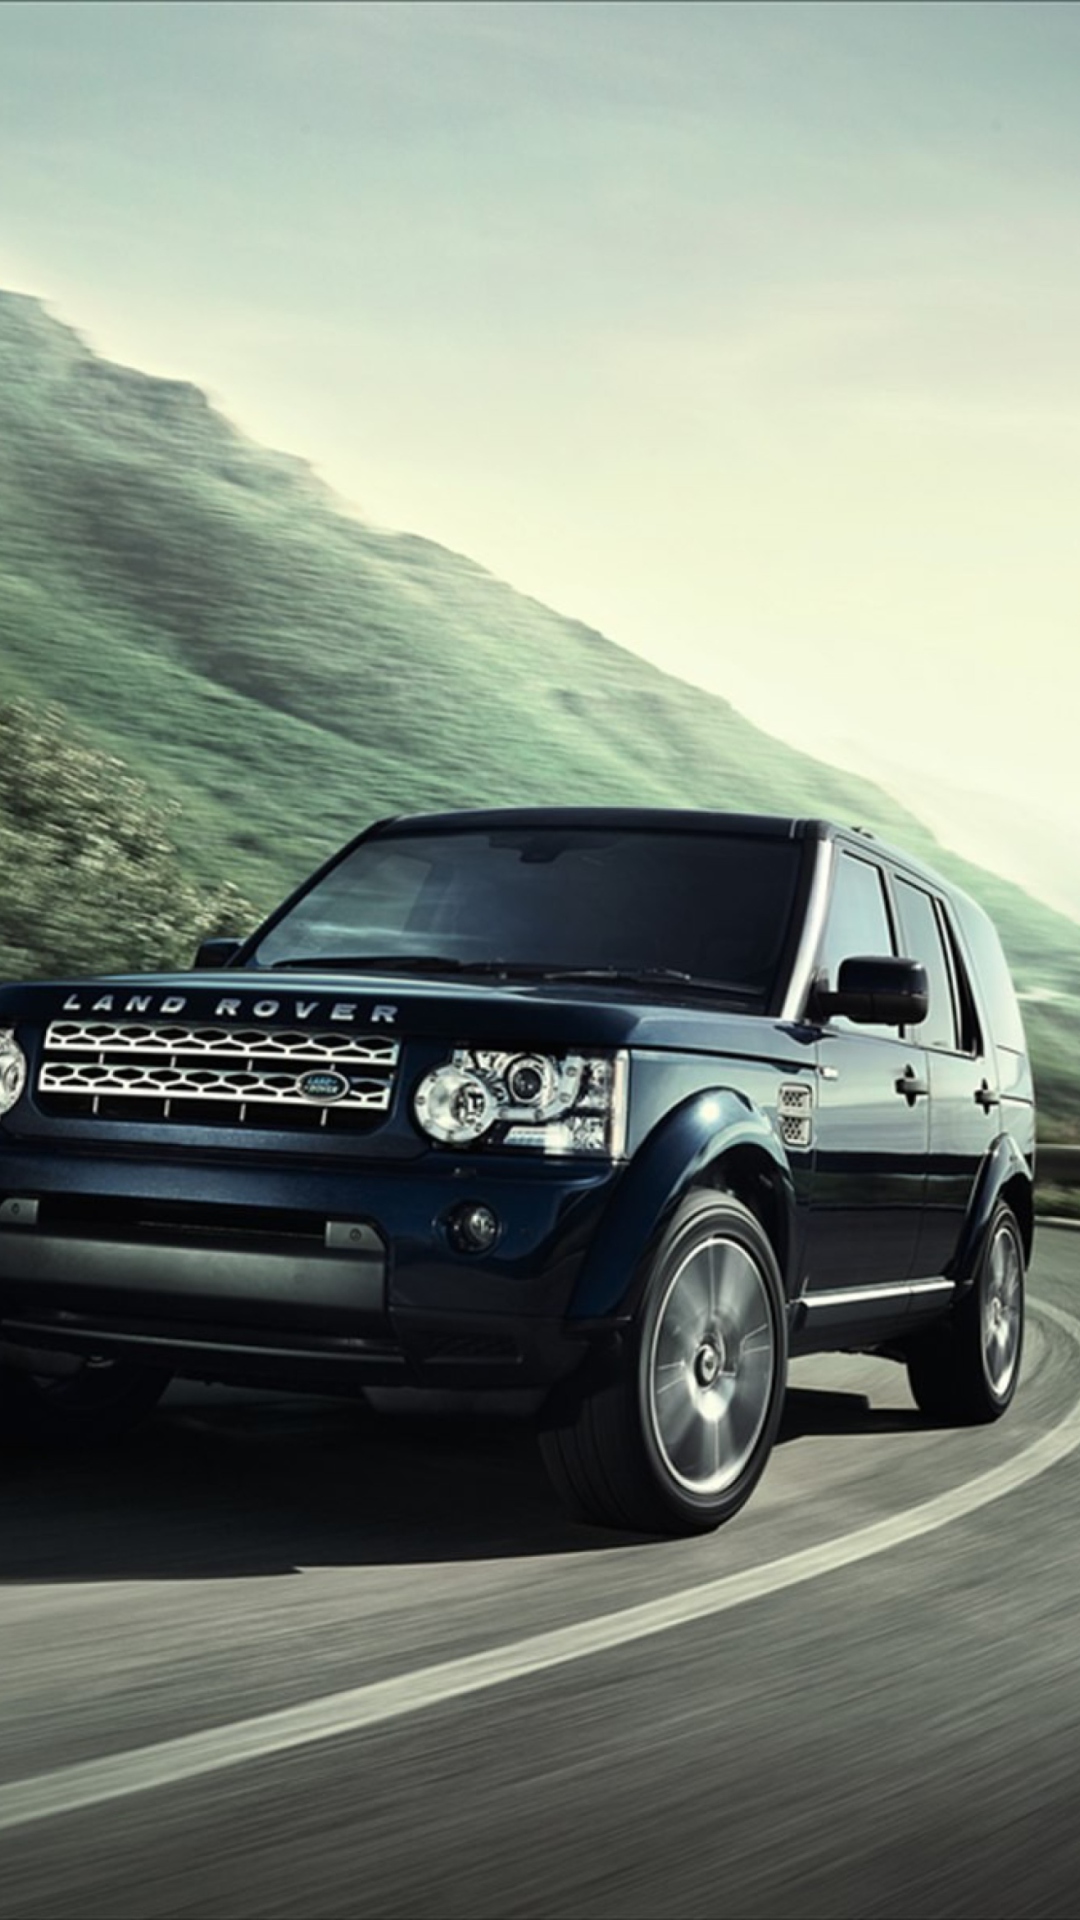 Land Rover Discovery 4 wallpaper 1080x1920